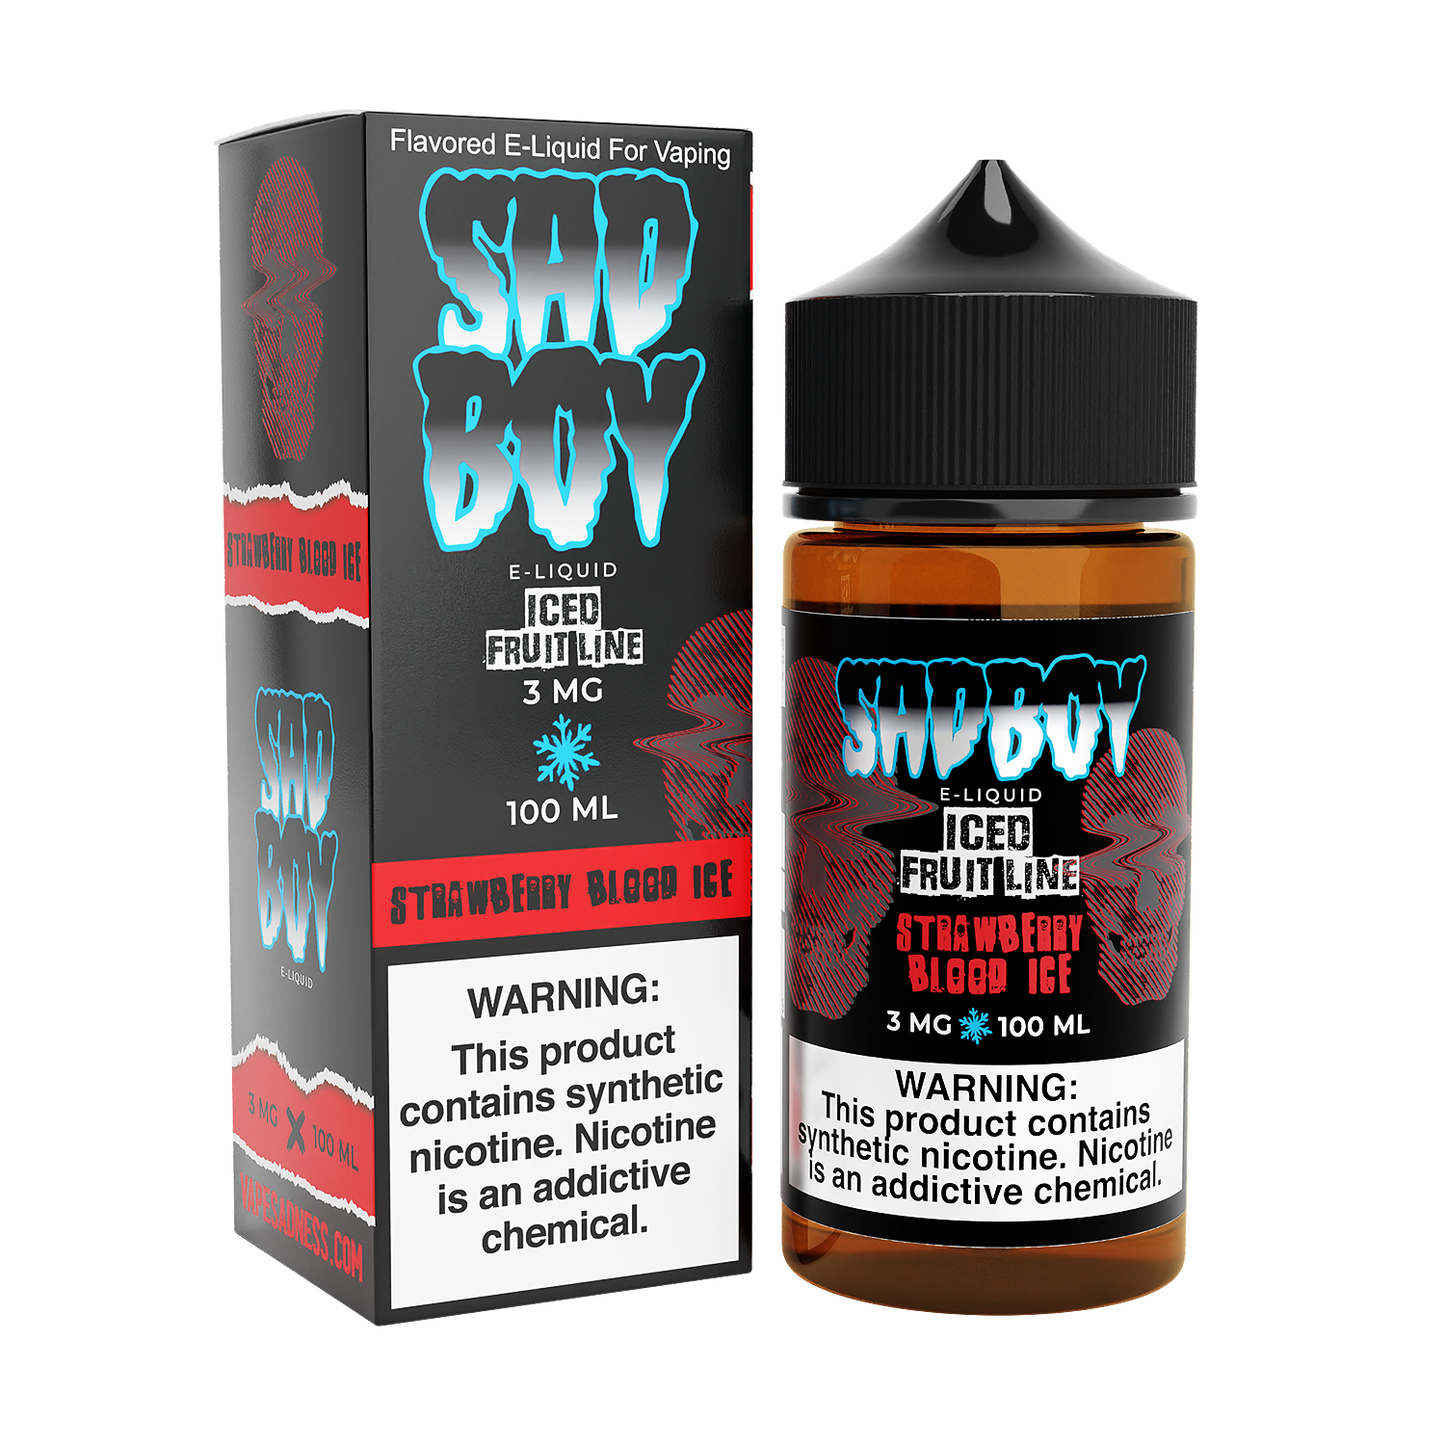 Strawberry Blood Ice by Sadboy E-Liquid 100ml with packaging